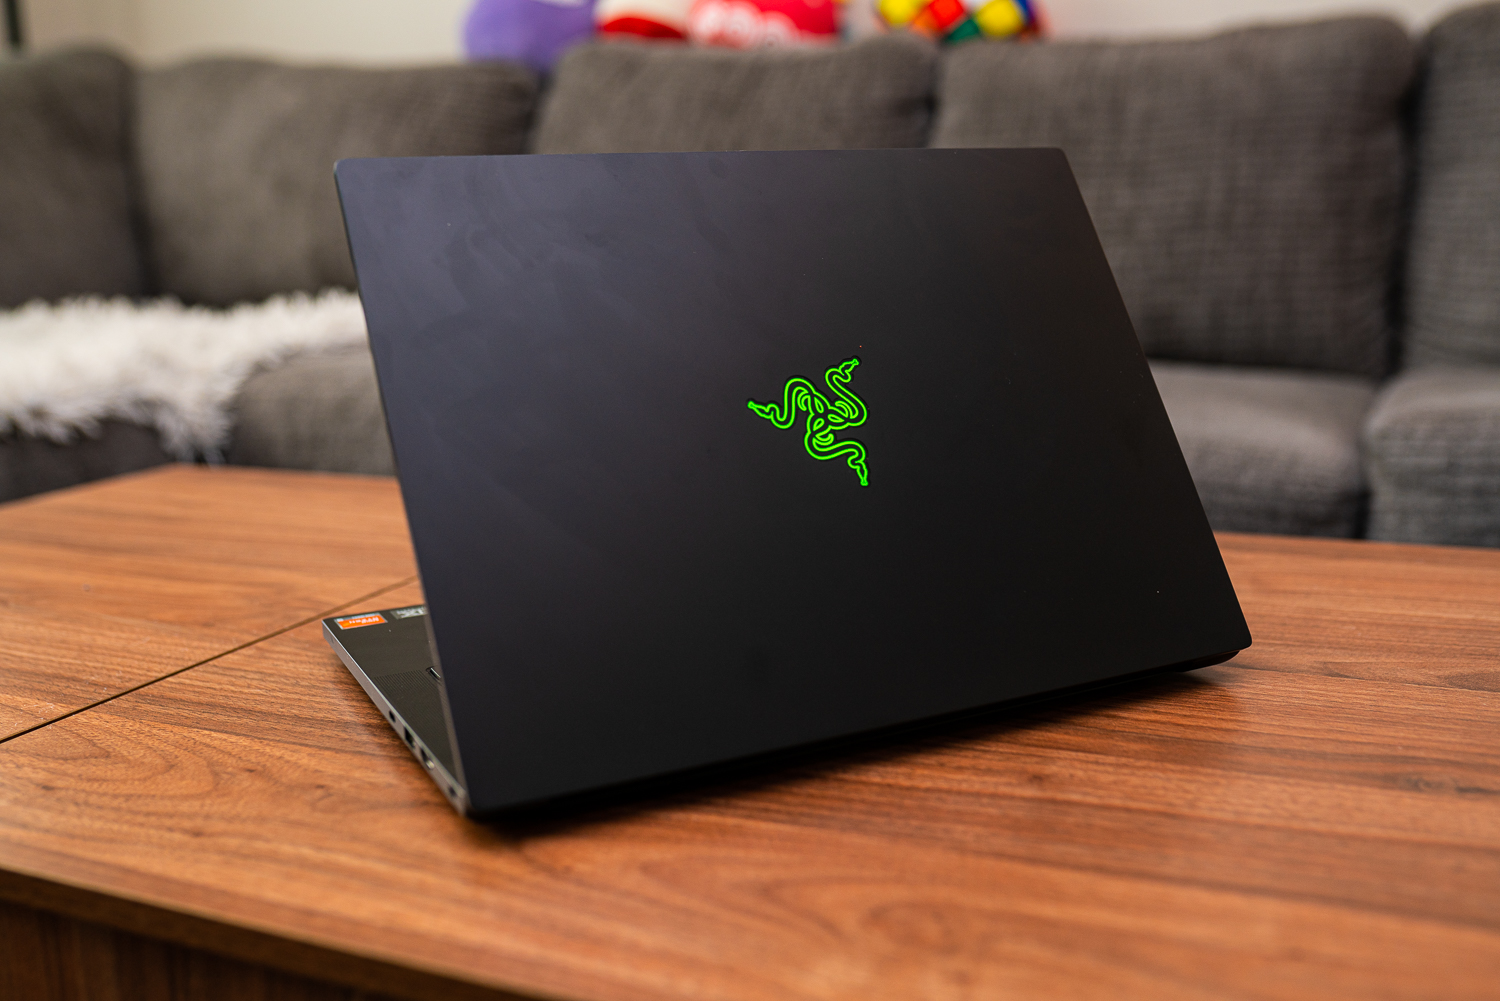 The back of the Razer Blade 14.